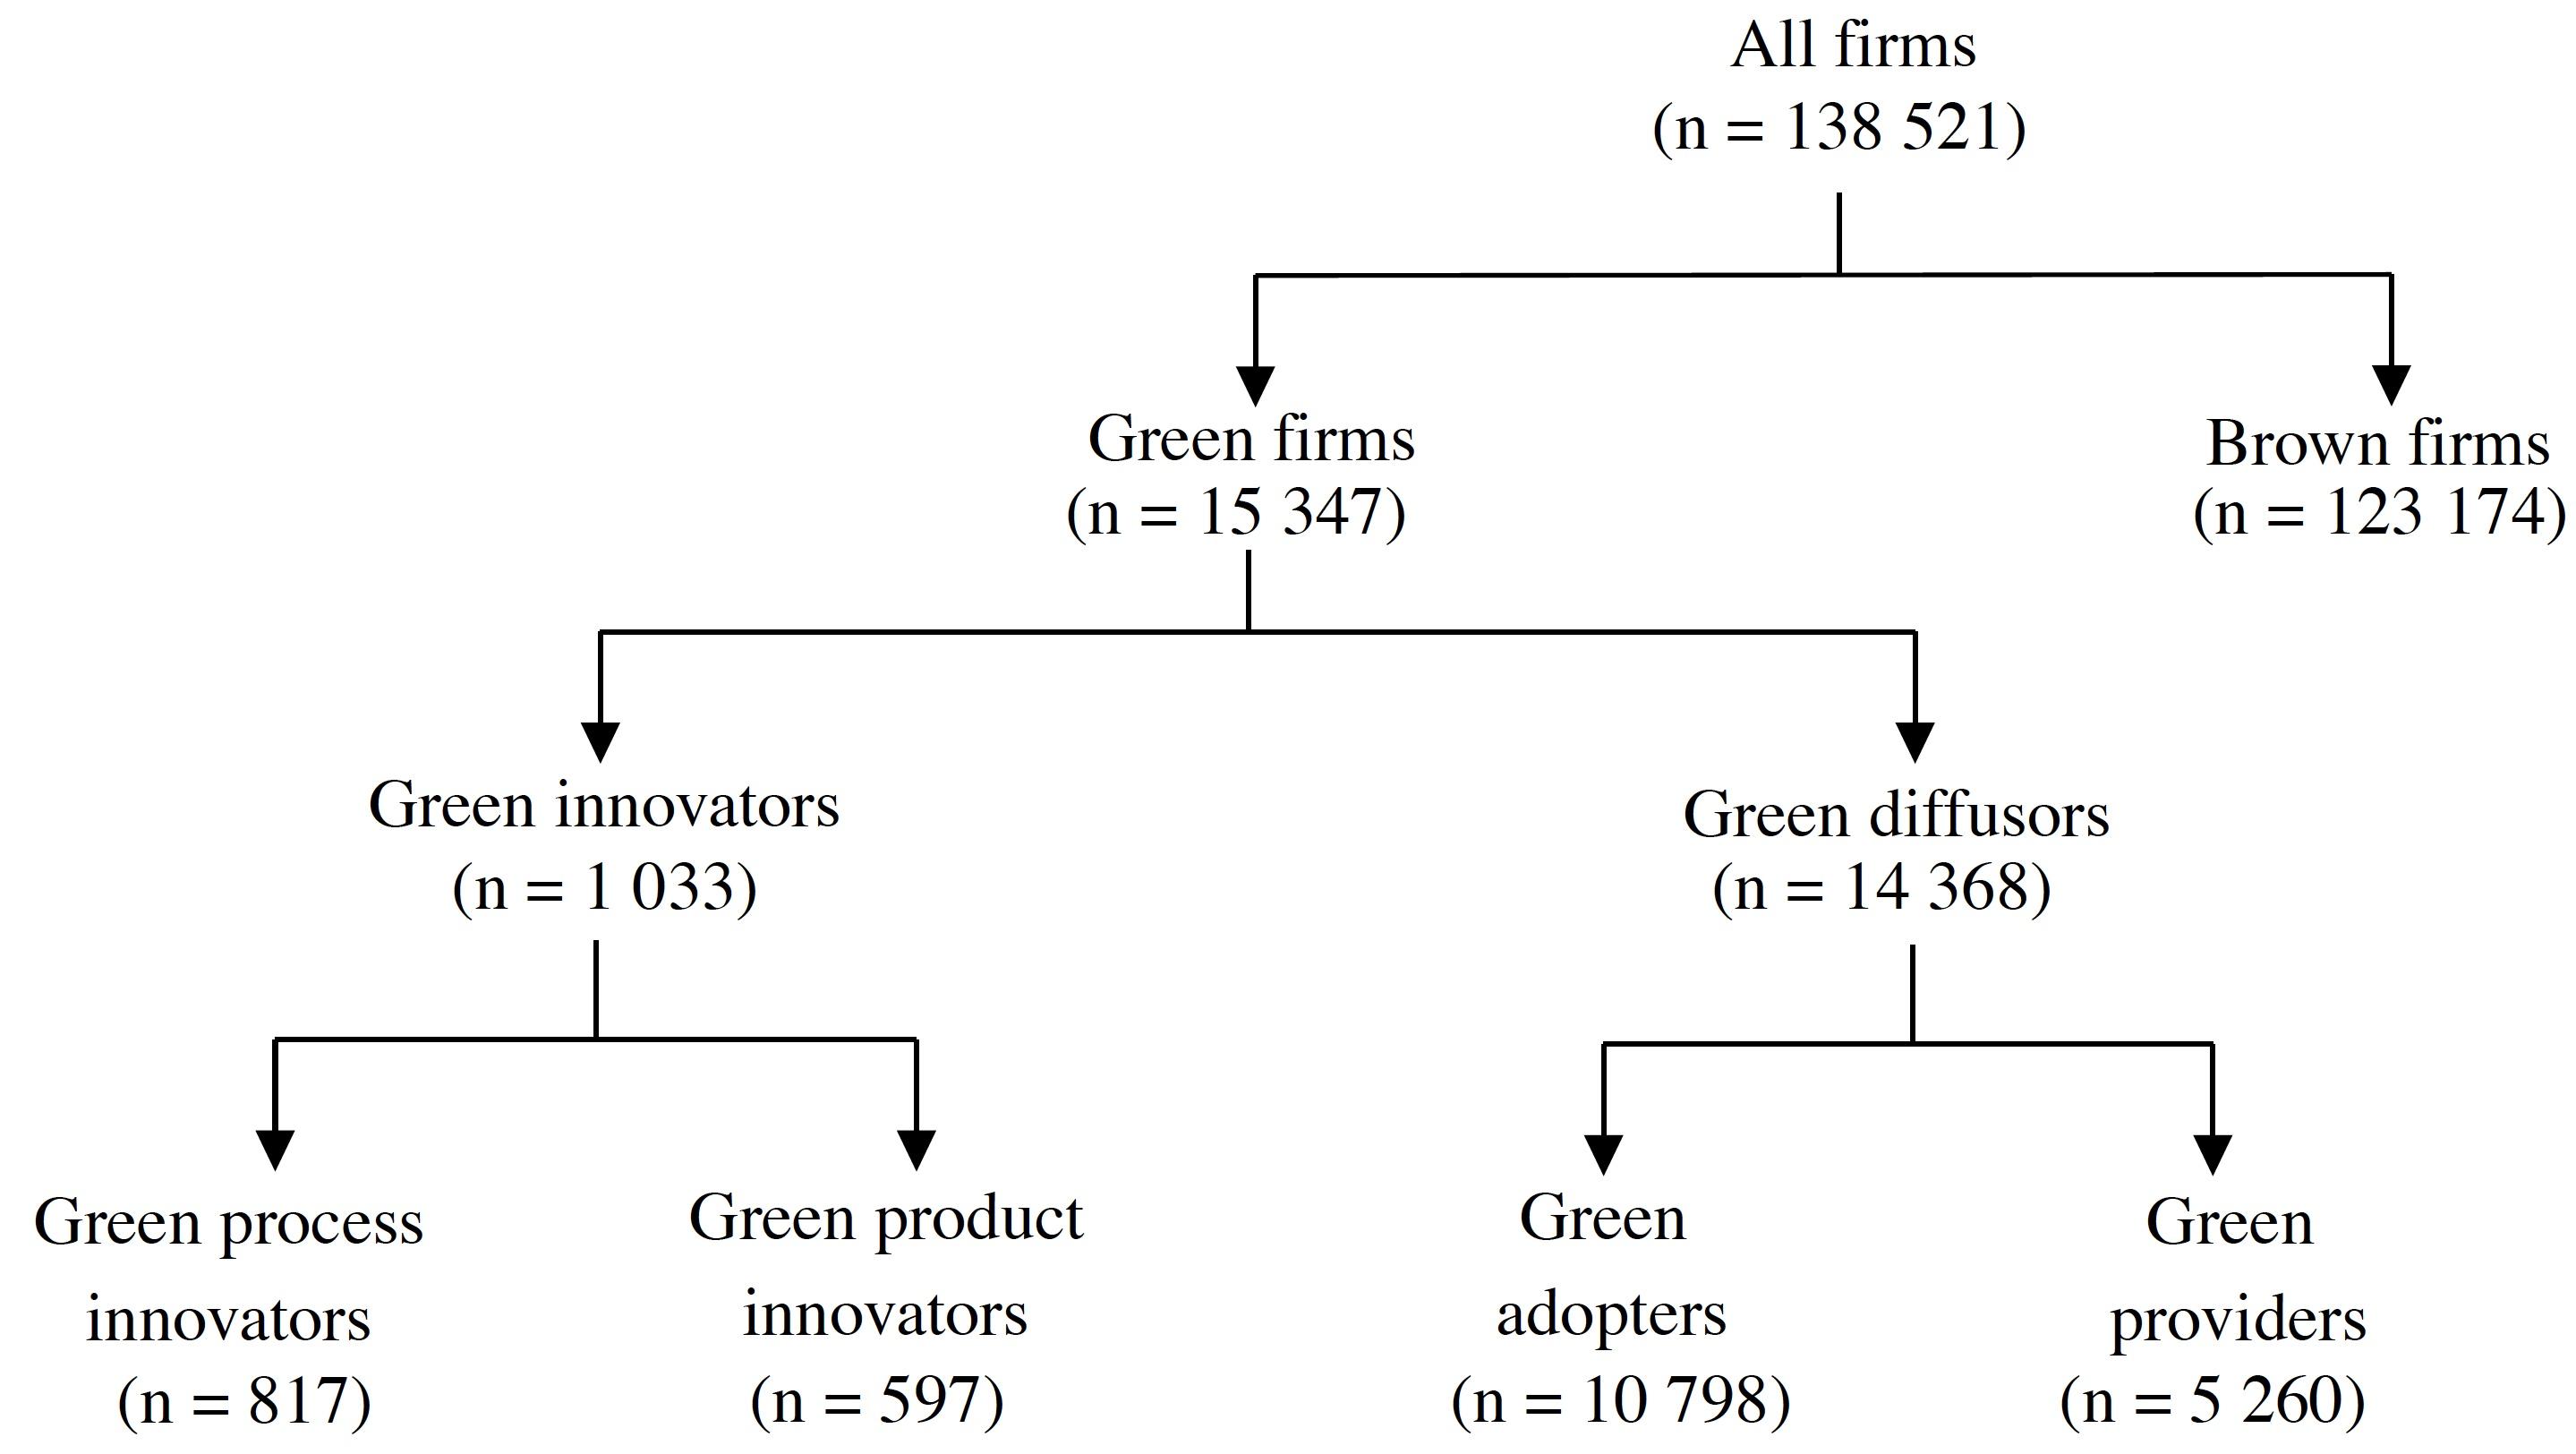 Incidence of various green activities by Belgian firms